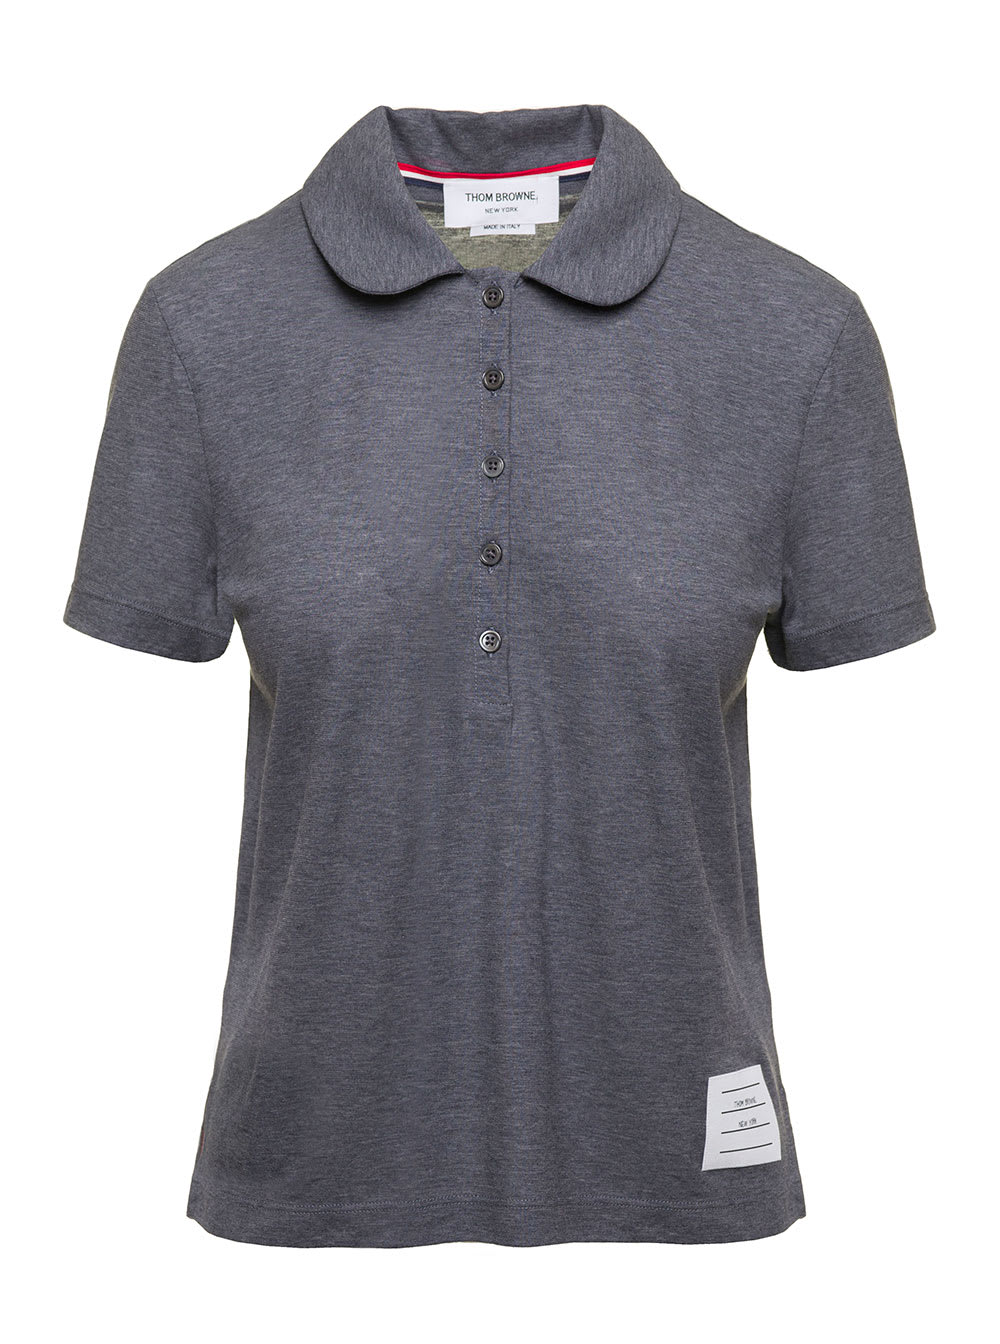 THOM BROWNE GREY POLO SHIRT WITH PETER-PAN COLLAR AND LOGO PATCH IN COTTON WOMAN